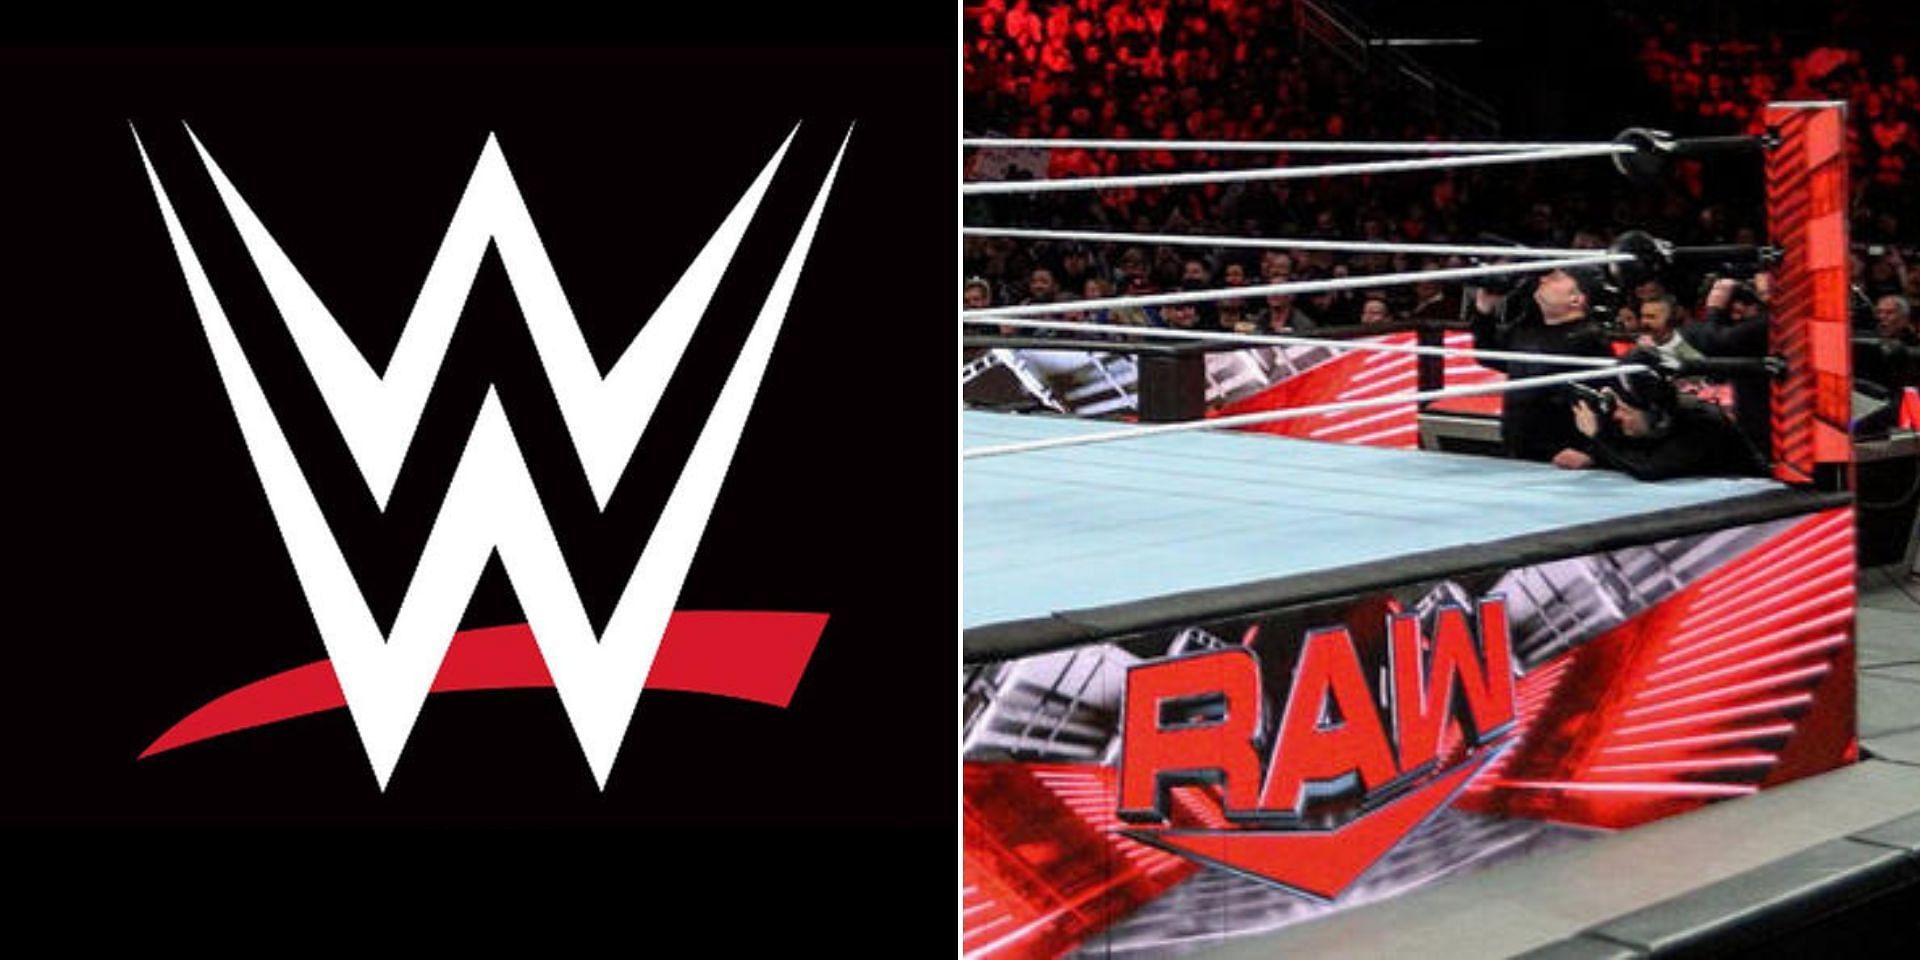 A young WWE Superstar made their RAW debut